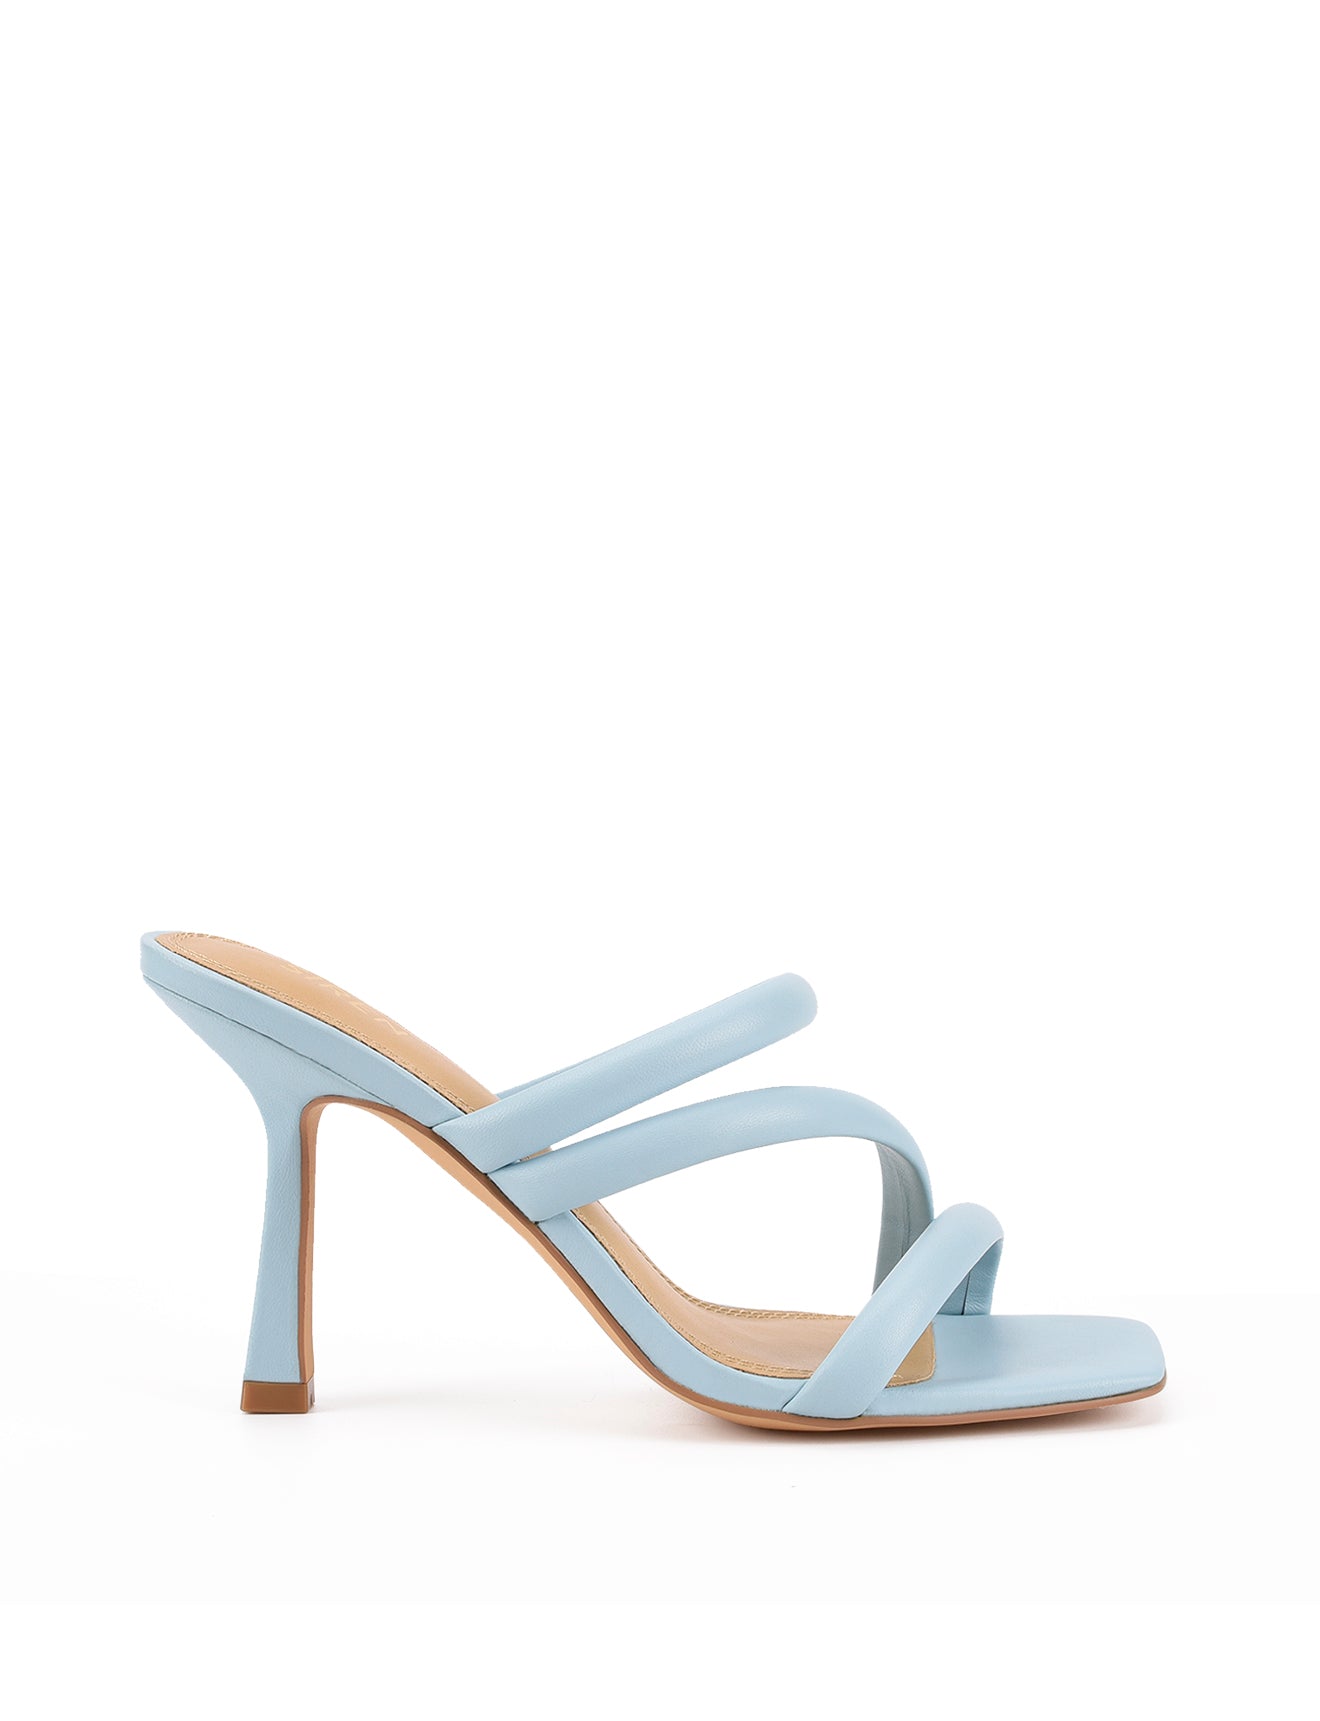 Spence Heeled Sandals - Pale Blue Leather